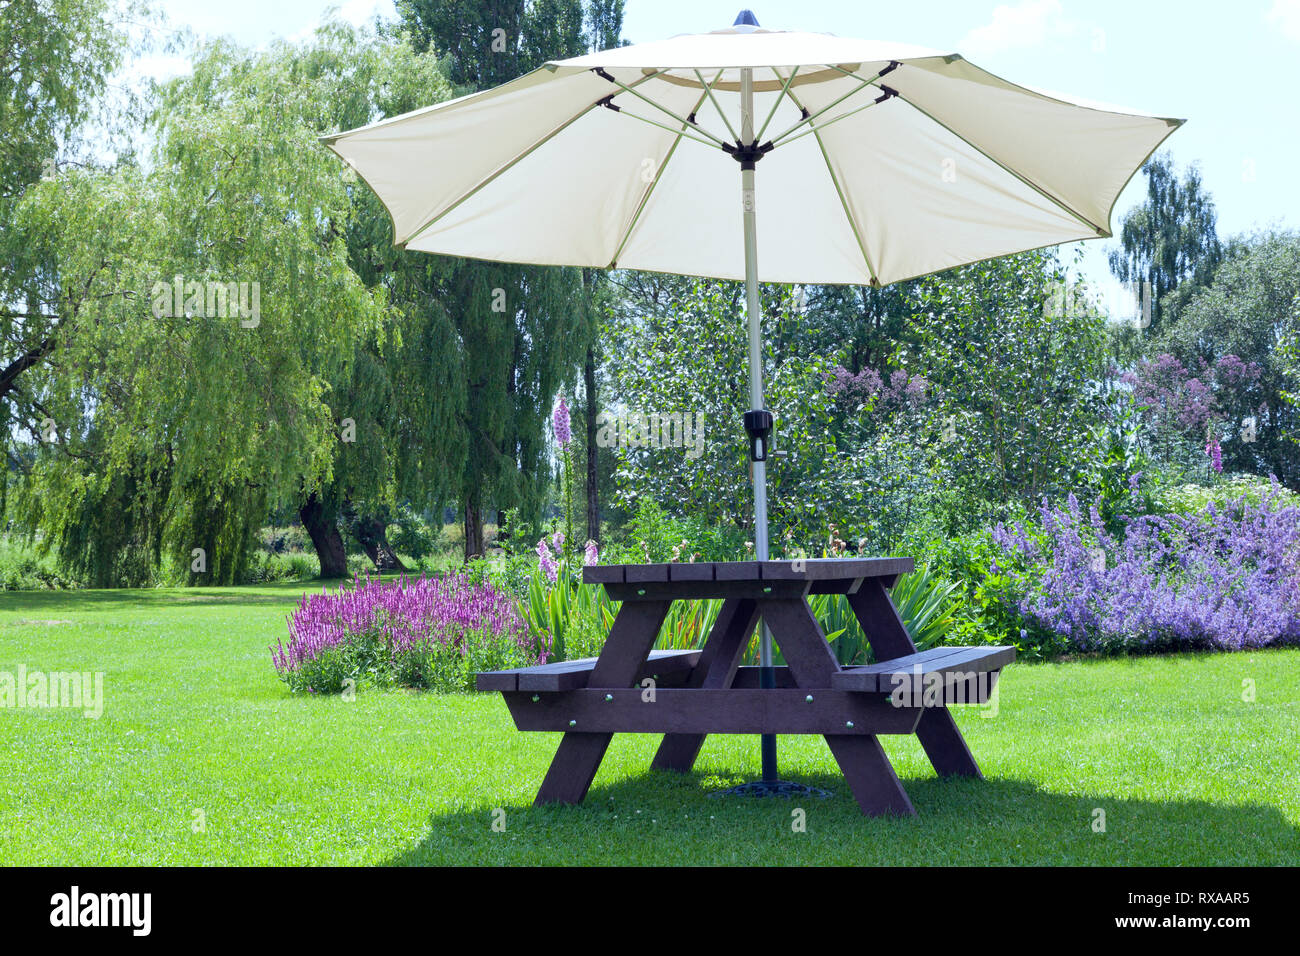 Relaxing Setting In A Pub Garden With Umbrella Sitting Bench Next To Flowers In Bloom